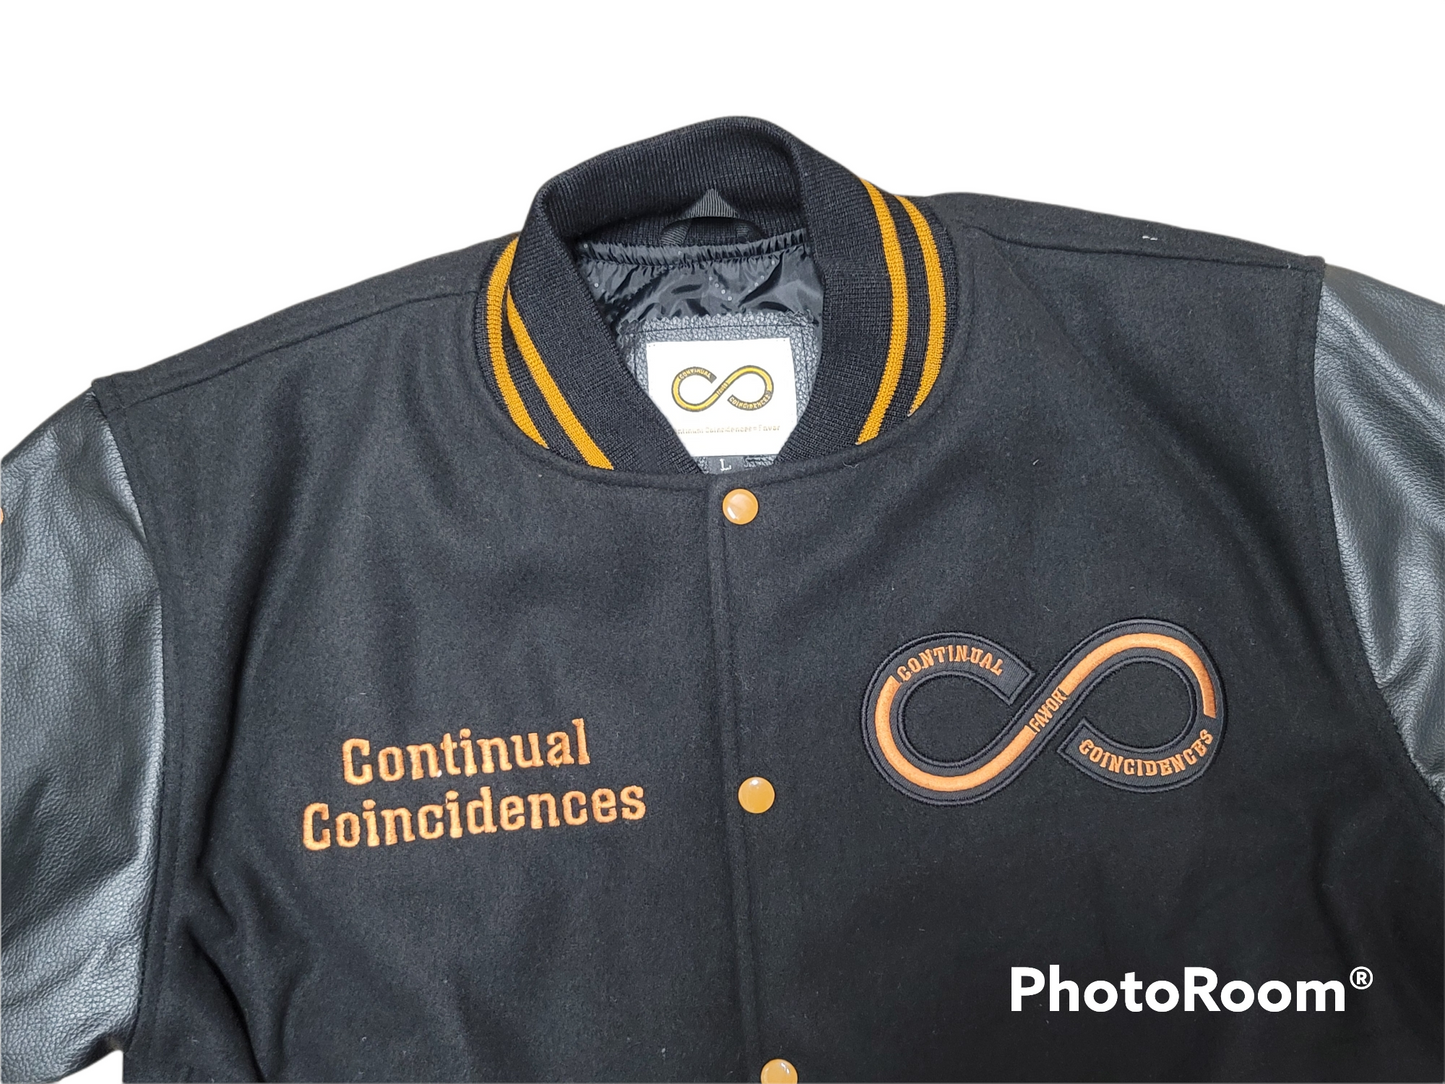 Continual Coincidences FAVORED (No Coincidences) Letterman Jacket - Limited Edition AGAPE Version